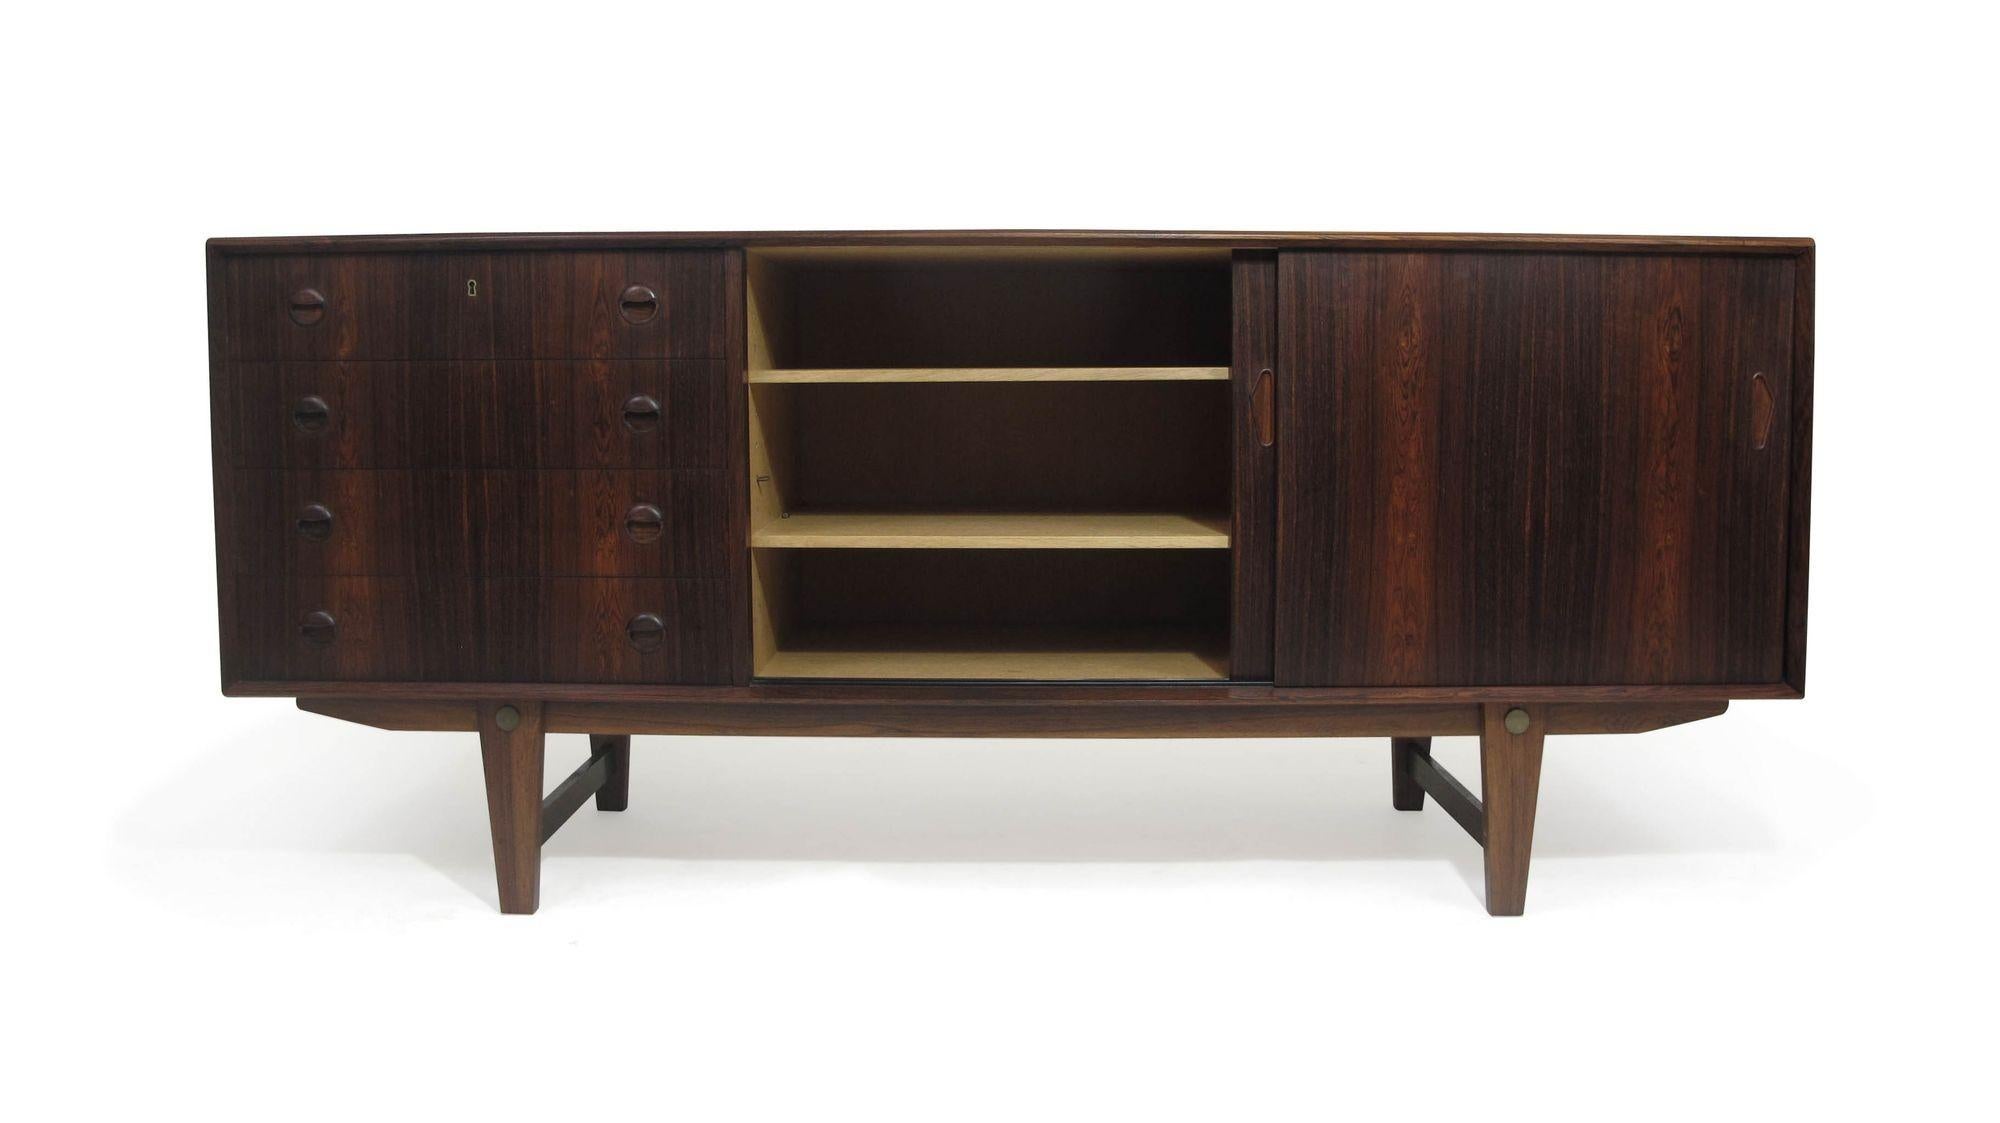 Finely crafted Brazilian rosewood credenza attributed to Bruno Hansen, Denmark, 1955. Features beveled edges, mitered corners, and stunning book-matched grain patterns across the front. Four drawers in center with locking top drawer, and sliding